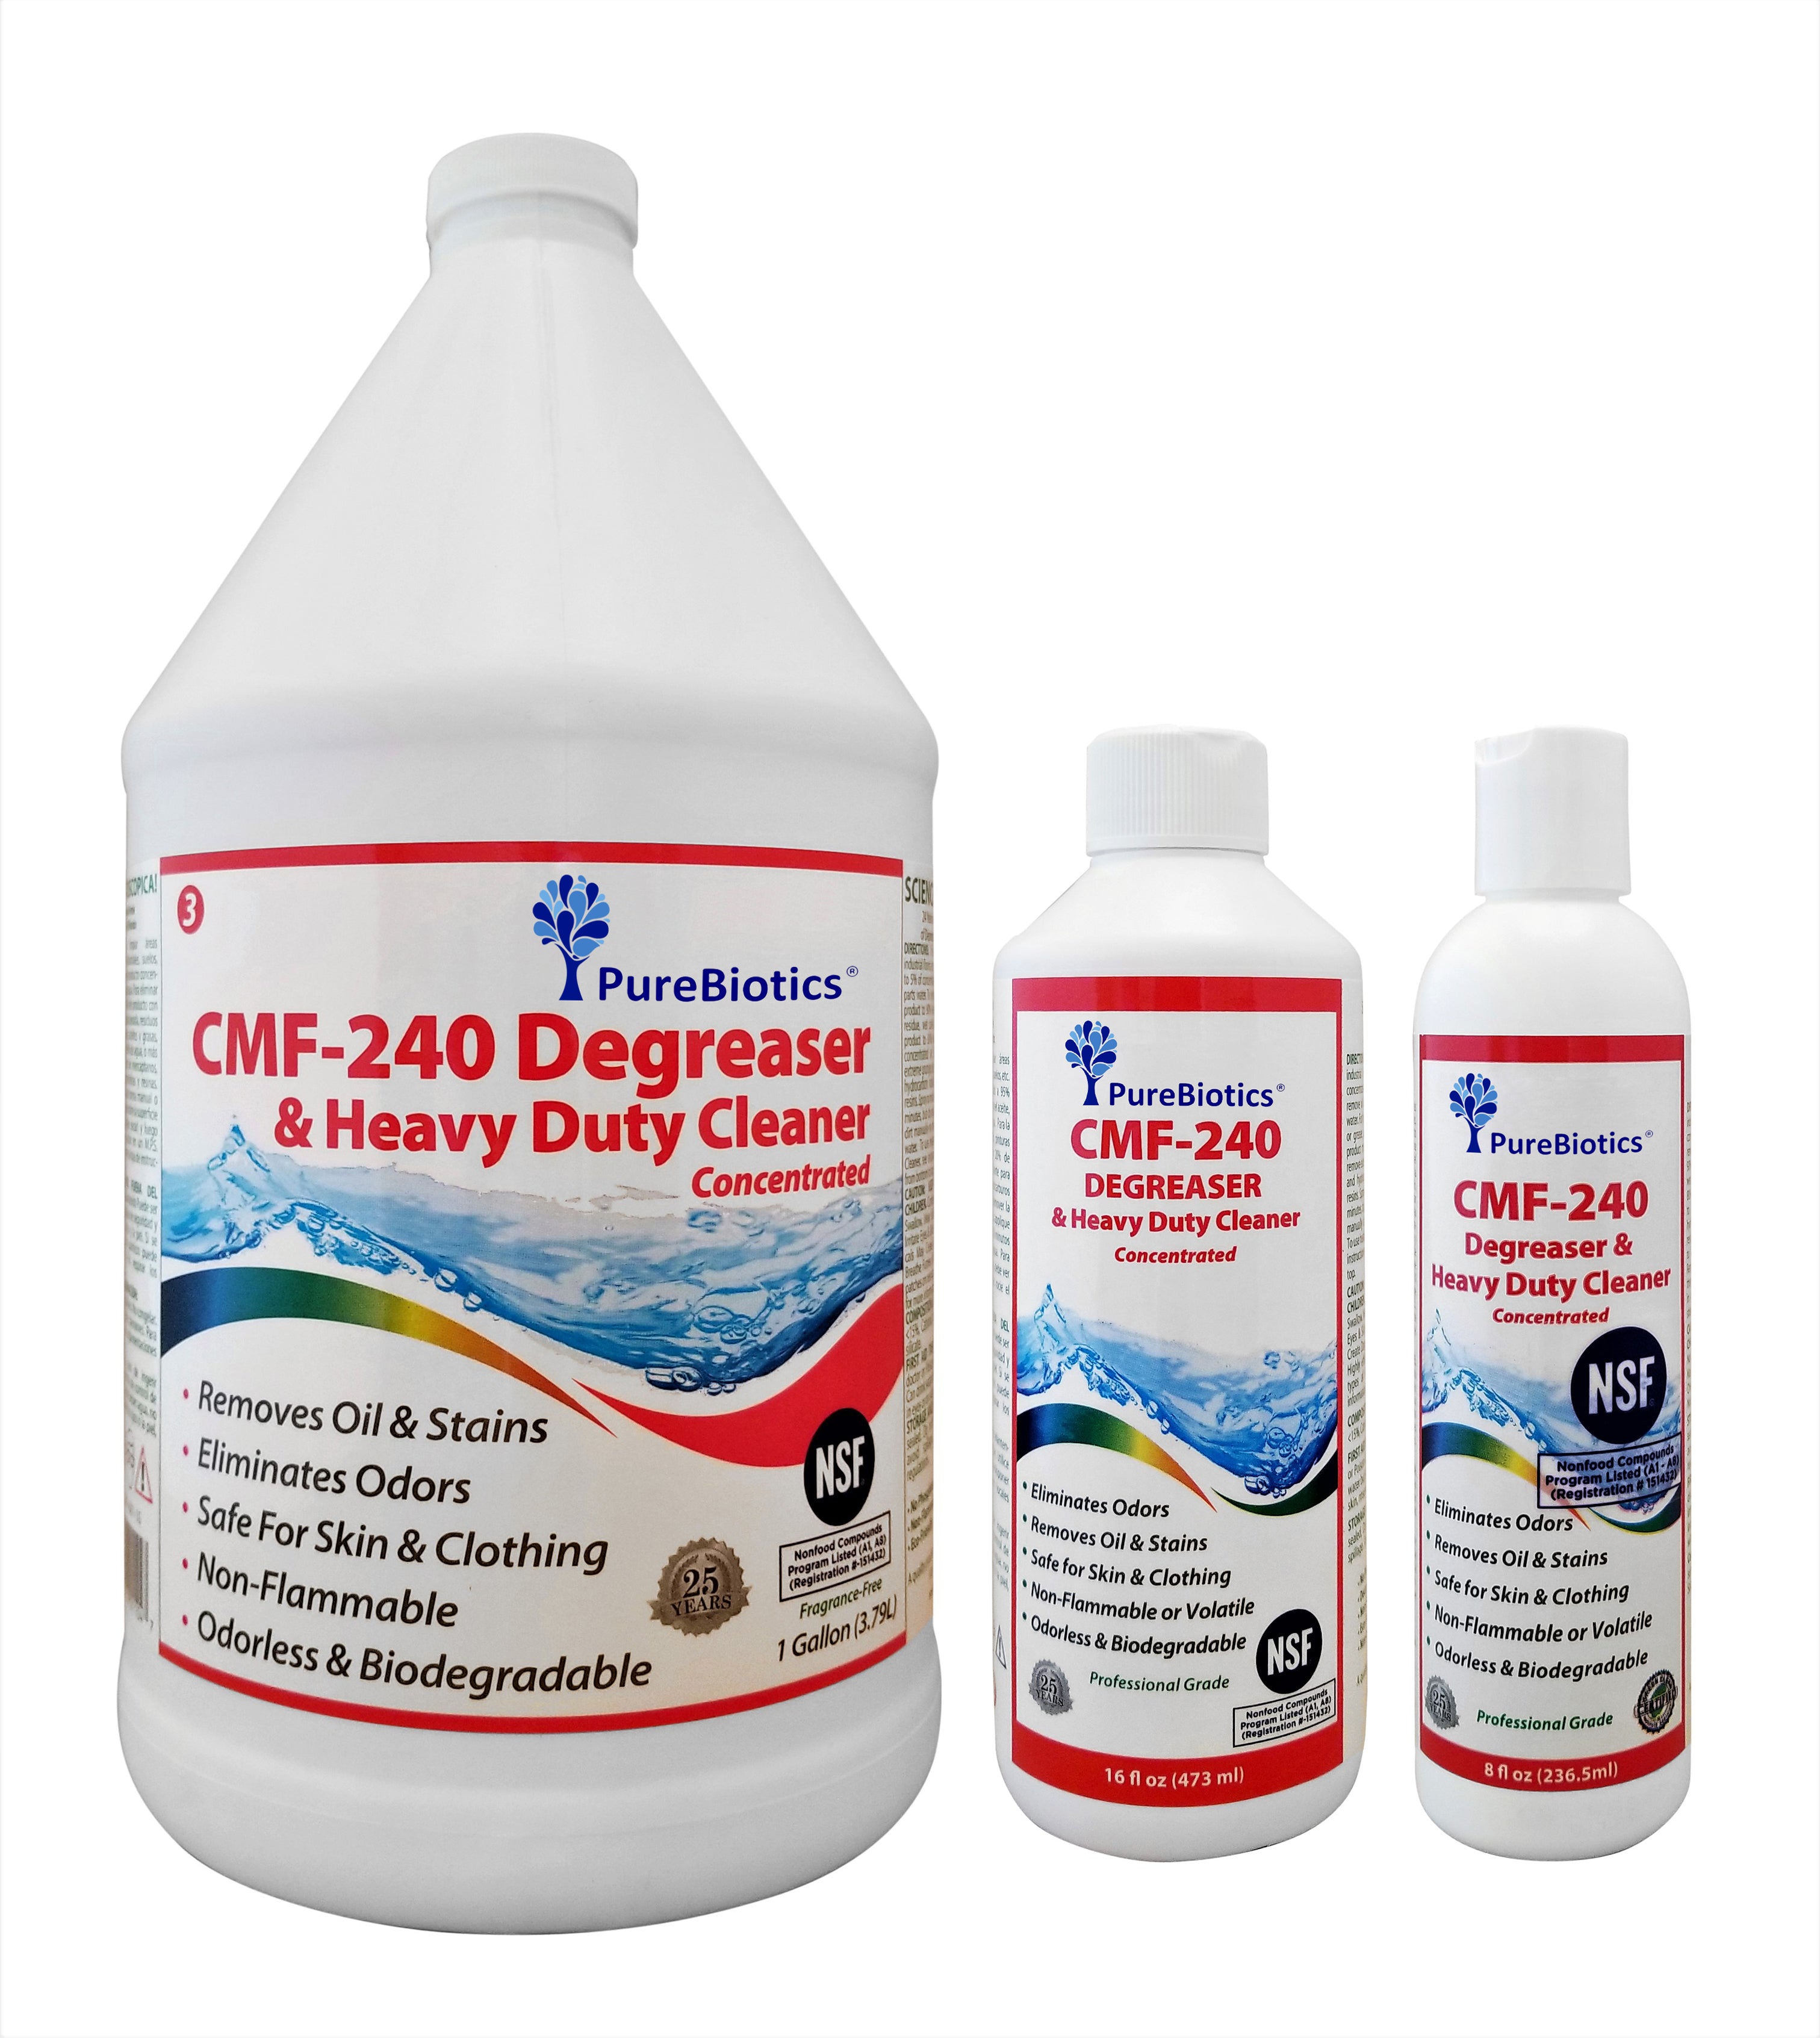 Allbrite Blast II Strong Caustic Degreaser | Highly Concentrated 